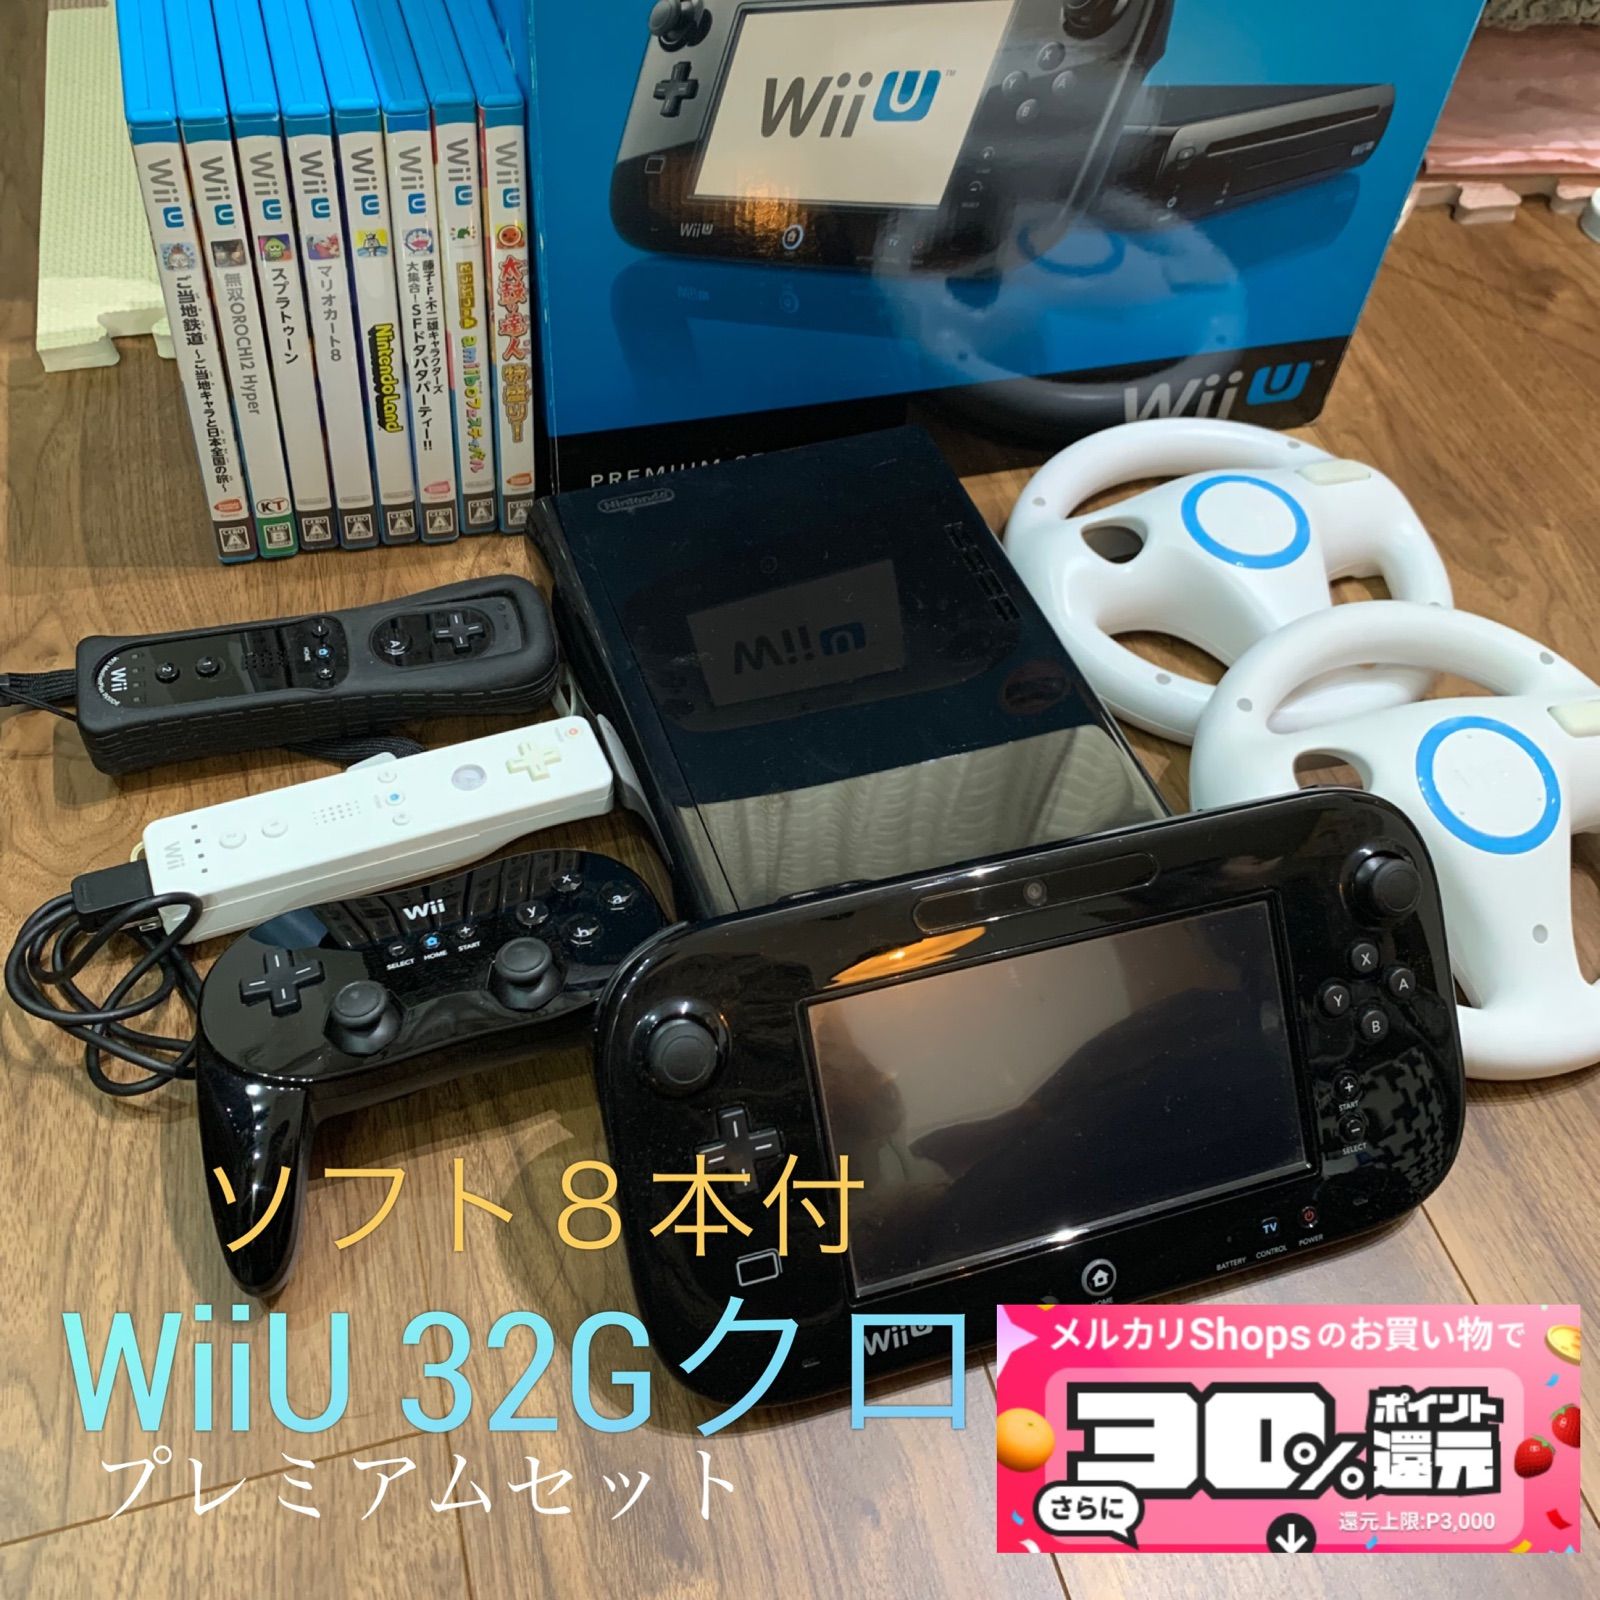 Nintendo Wii Uセットとソフト8本セット - 家庭用ゲーム本体